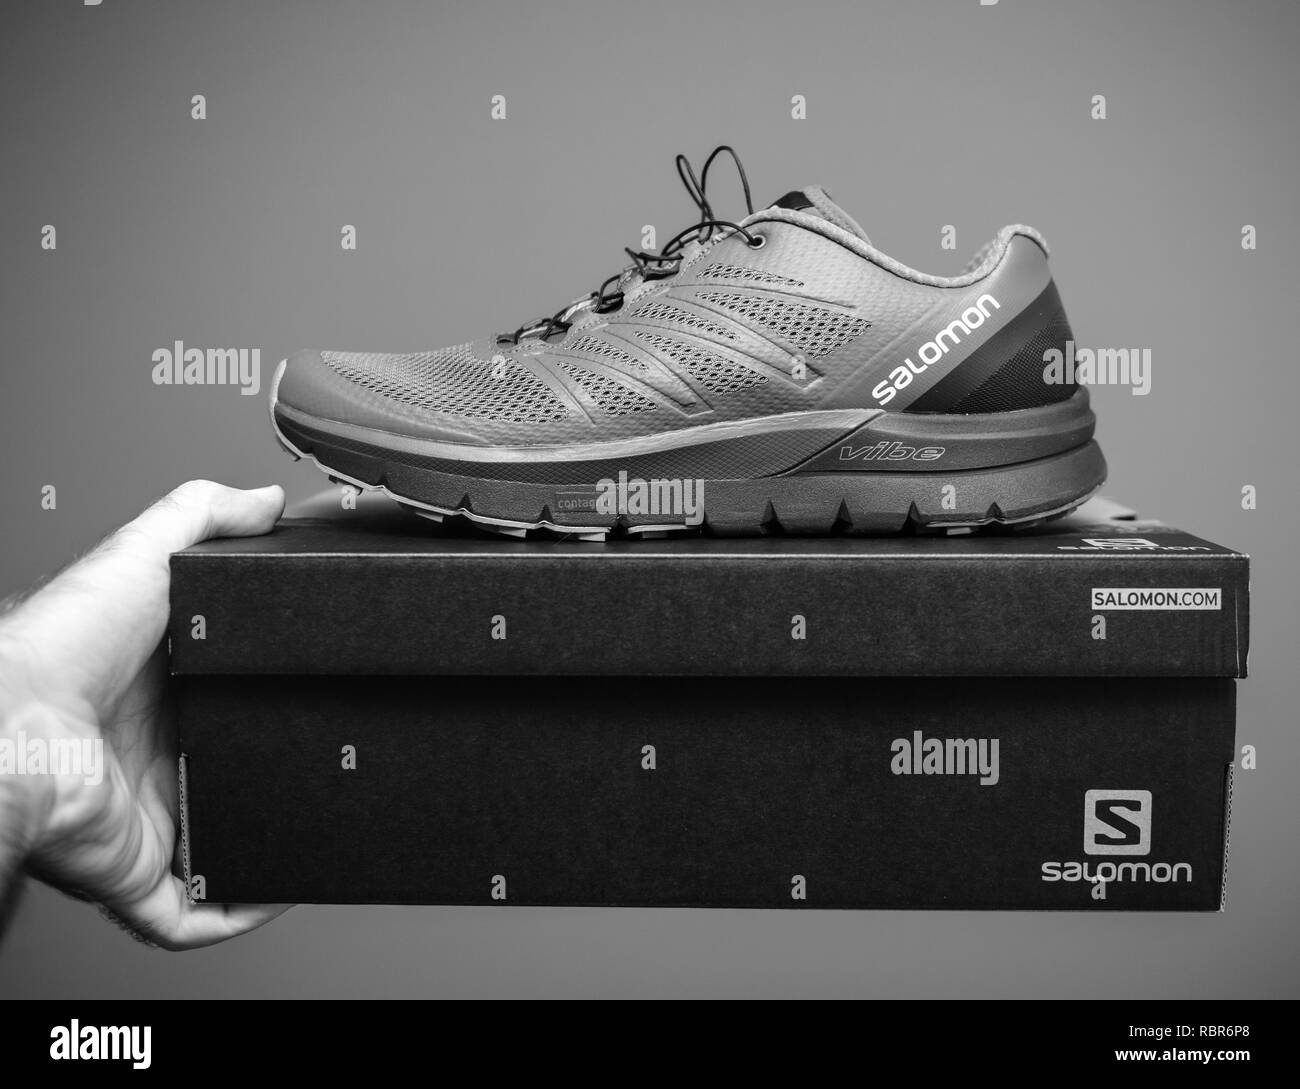 PARIS, FRANCE - NOV 22, 2018: Man holding against gray background a box  with a pair of new Salomon Sense Pro Max everyday trail running performance  with maximum cushioning black and white